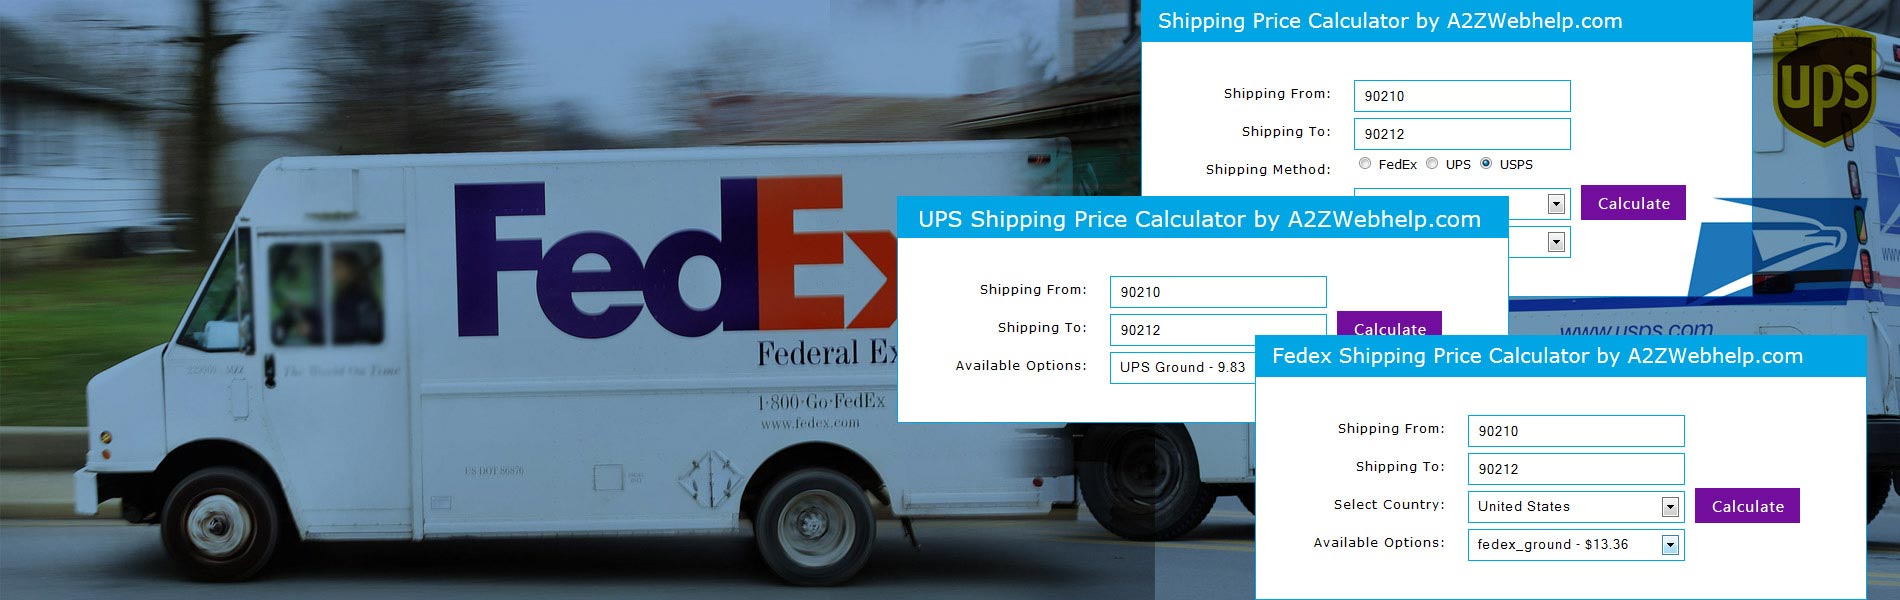 PHP Shipping Price Calculator